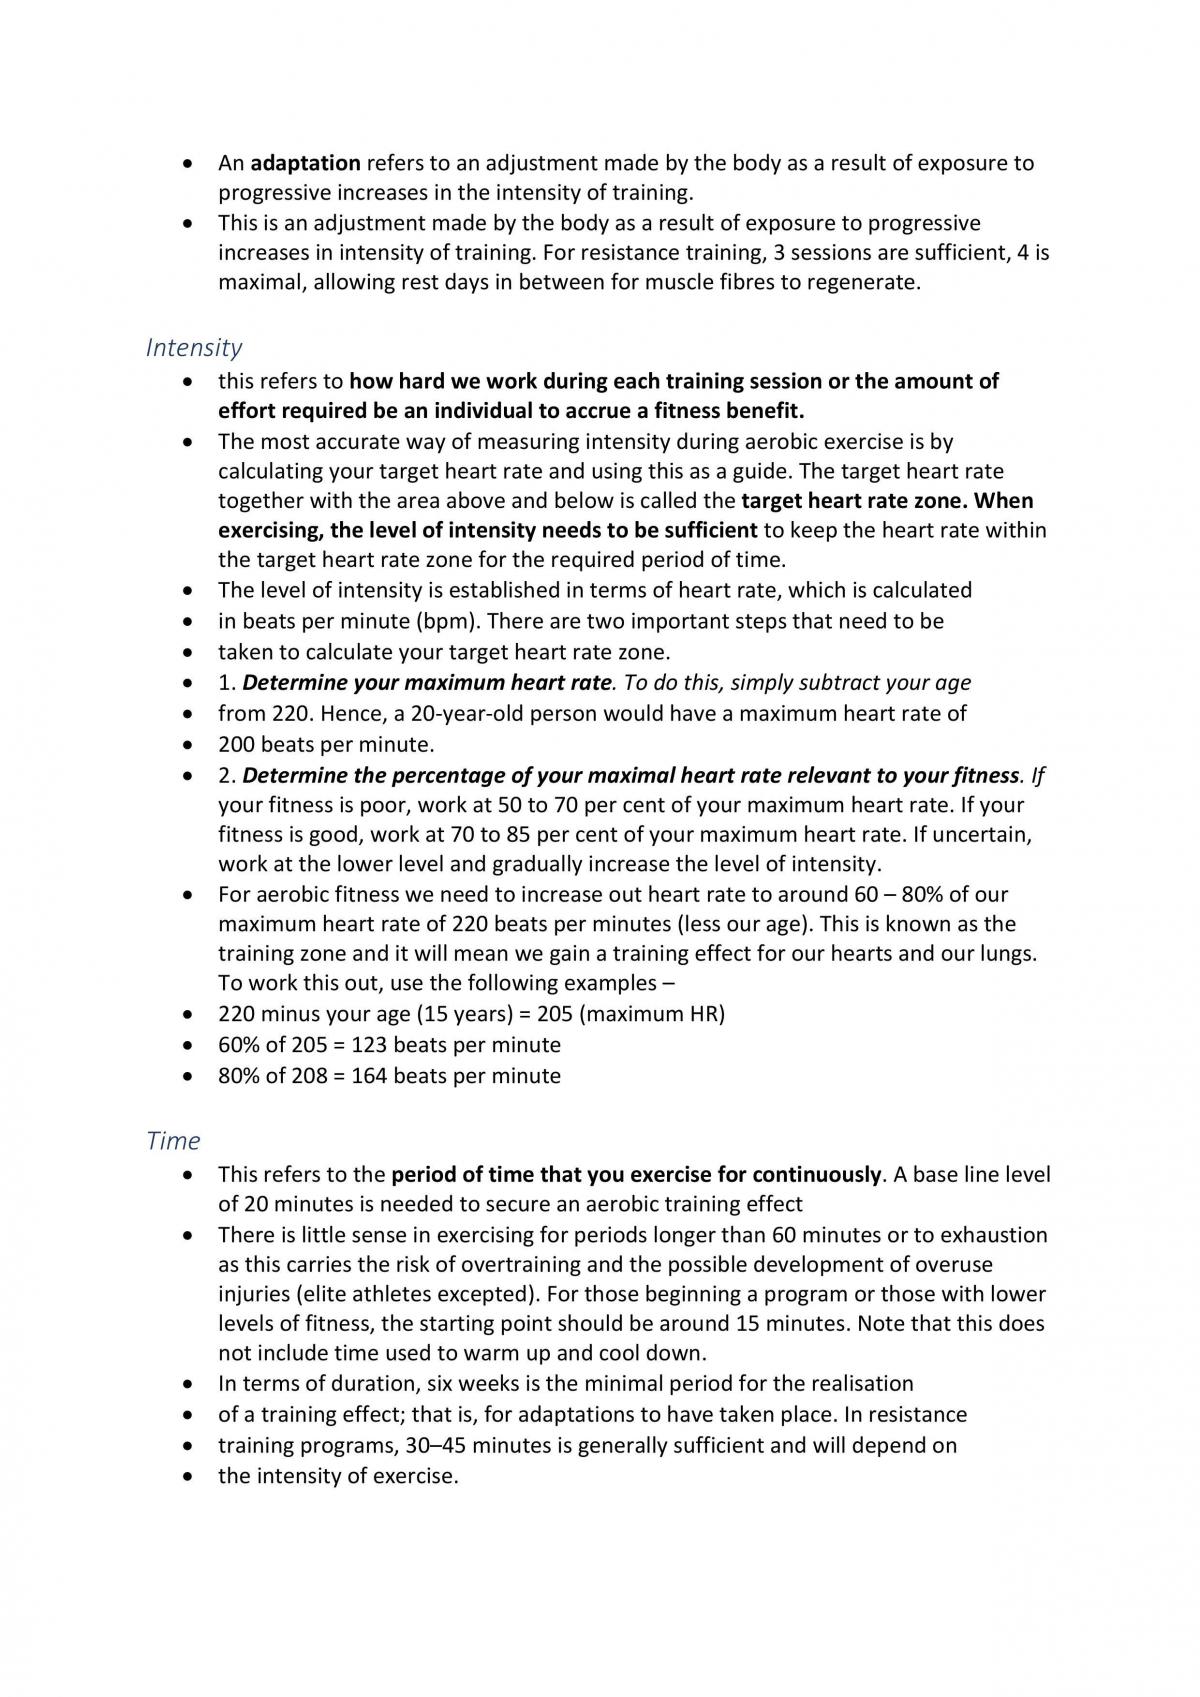 PDHPE Study Notes  - Page 60